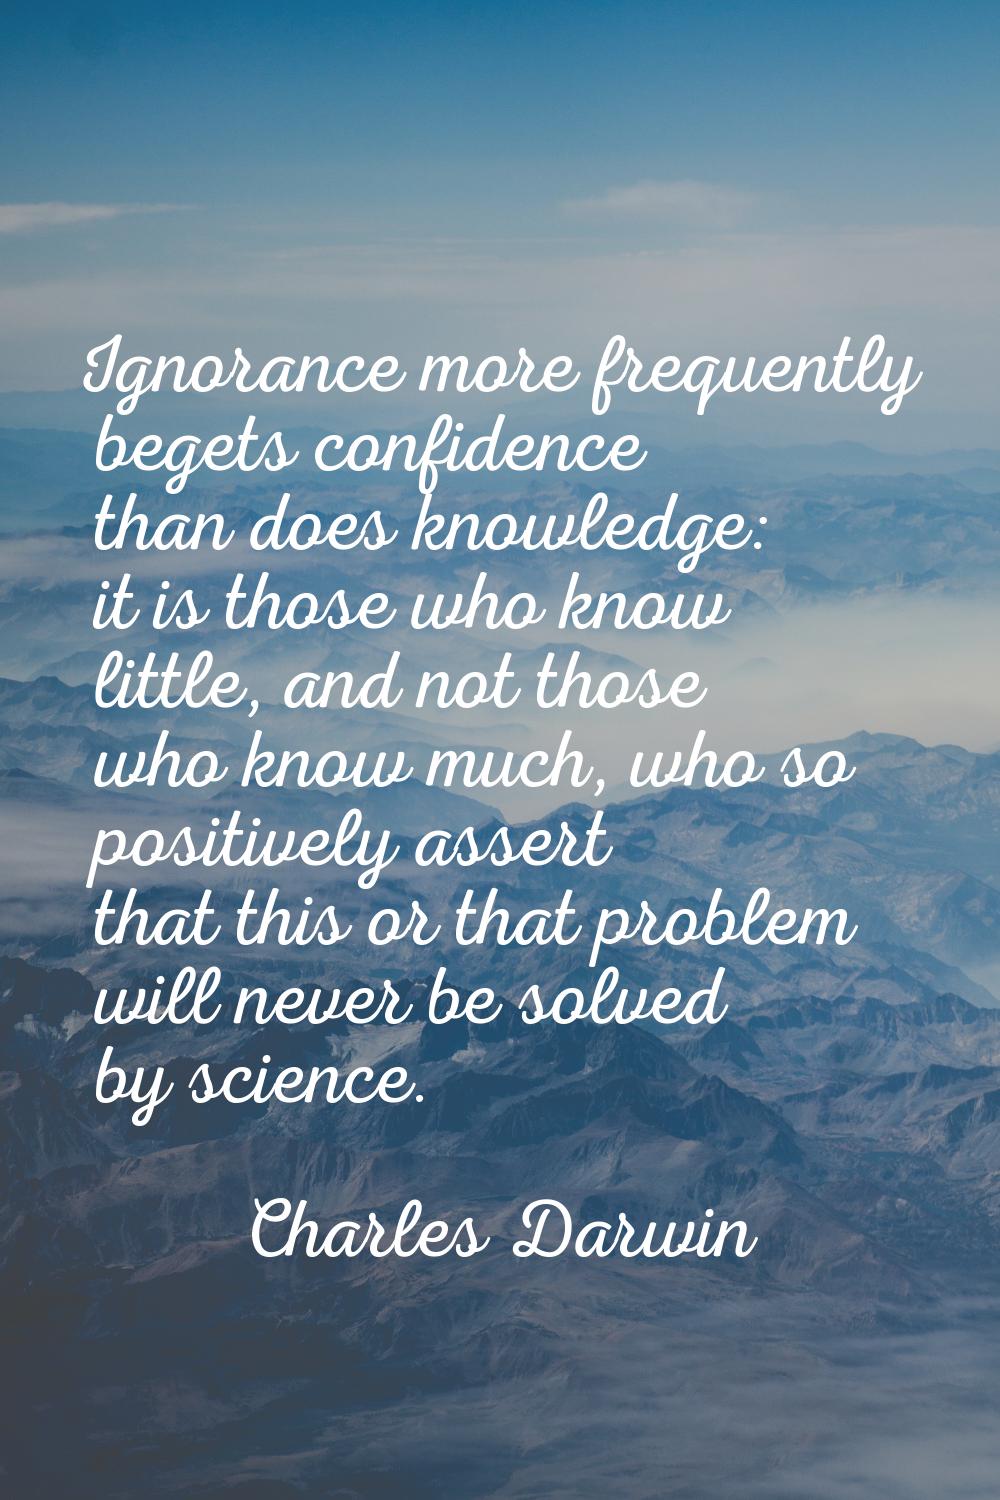 Ignorance more frequently begets confidence than does knowledge: it is those who know little, and n